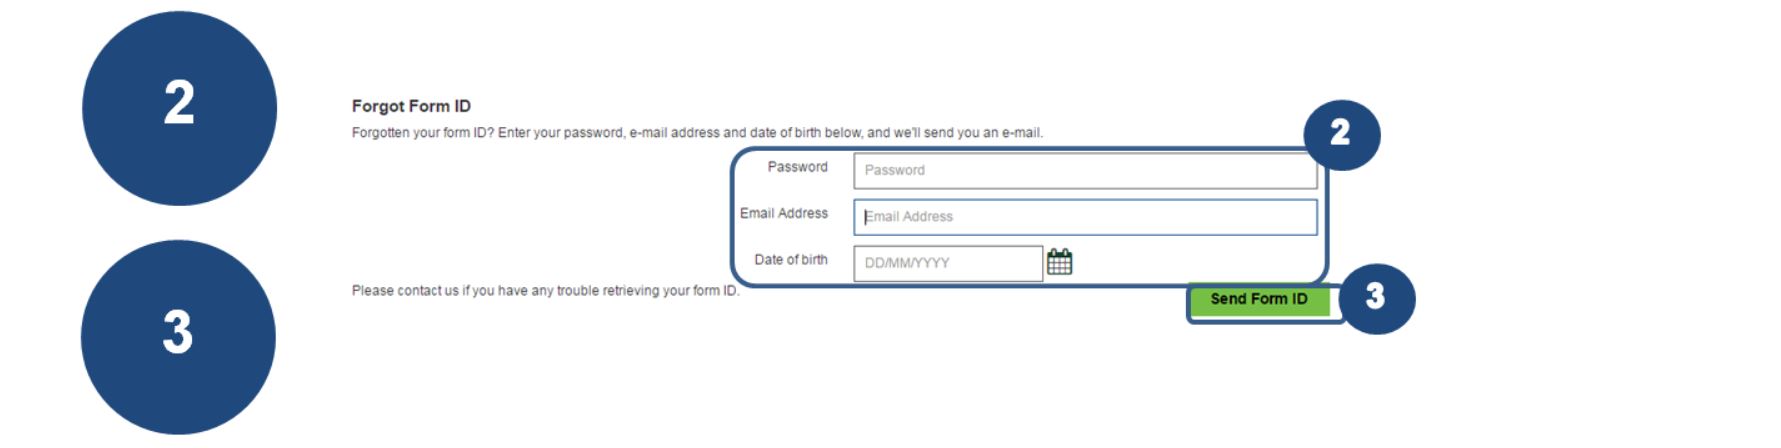 2 Enter your password, email address and date of birth.